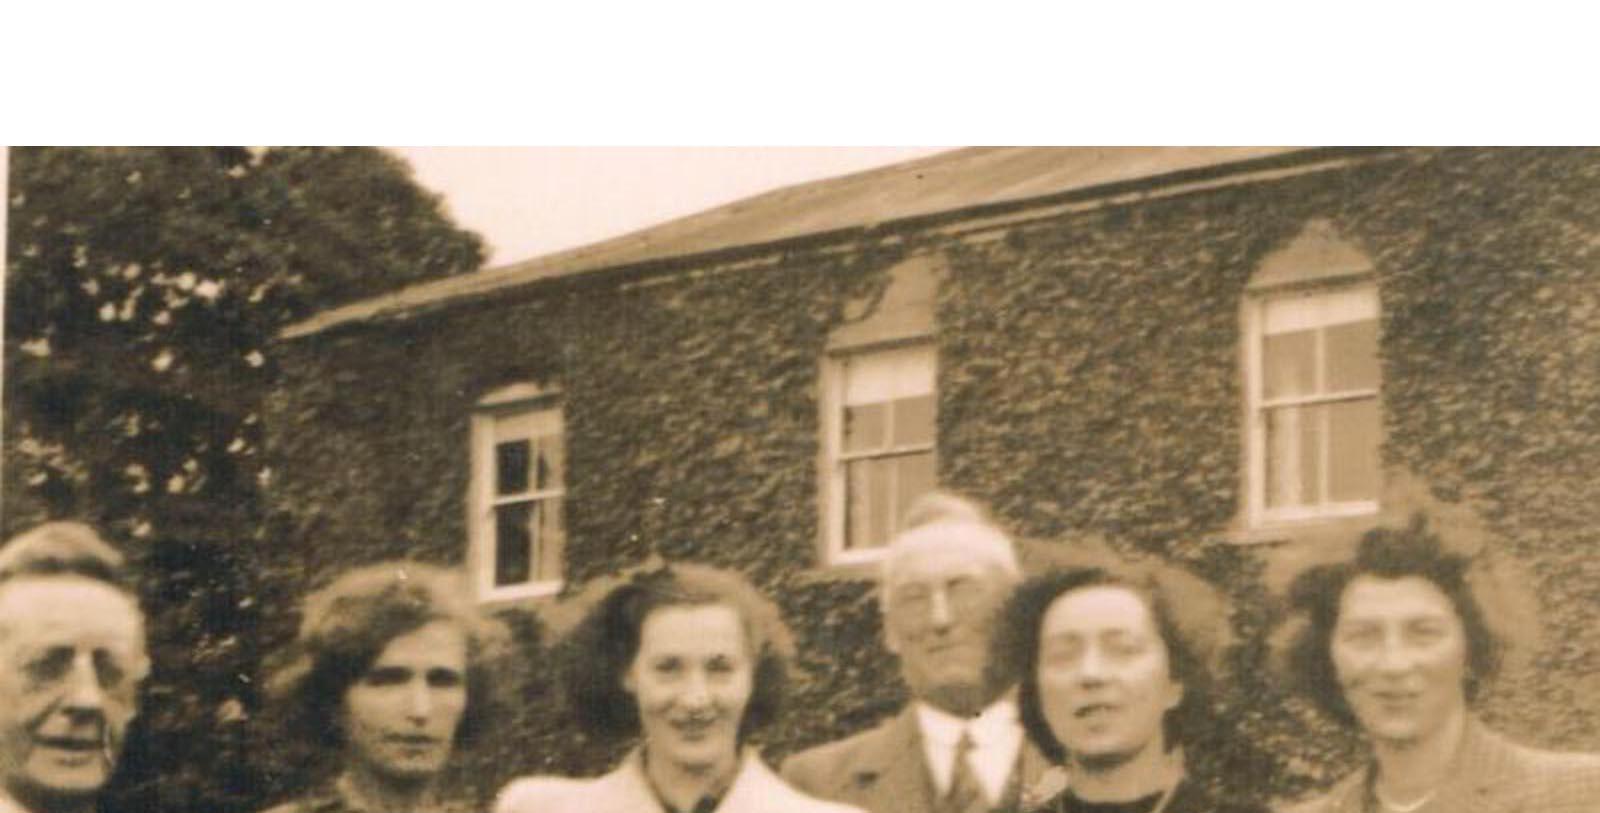 Historic Image of J.R.R. Tolkein at Gregans Castle in Ballyvaughan, County Clare, Ireland from the 1950s